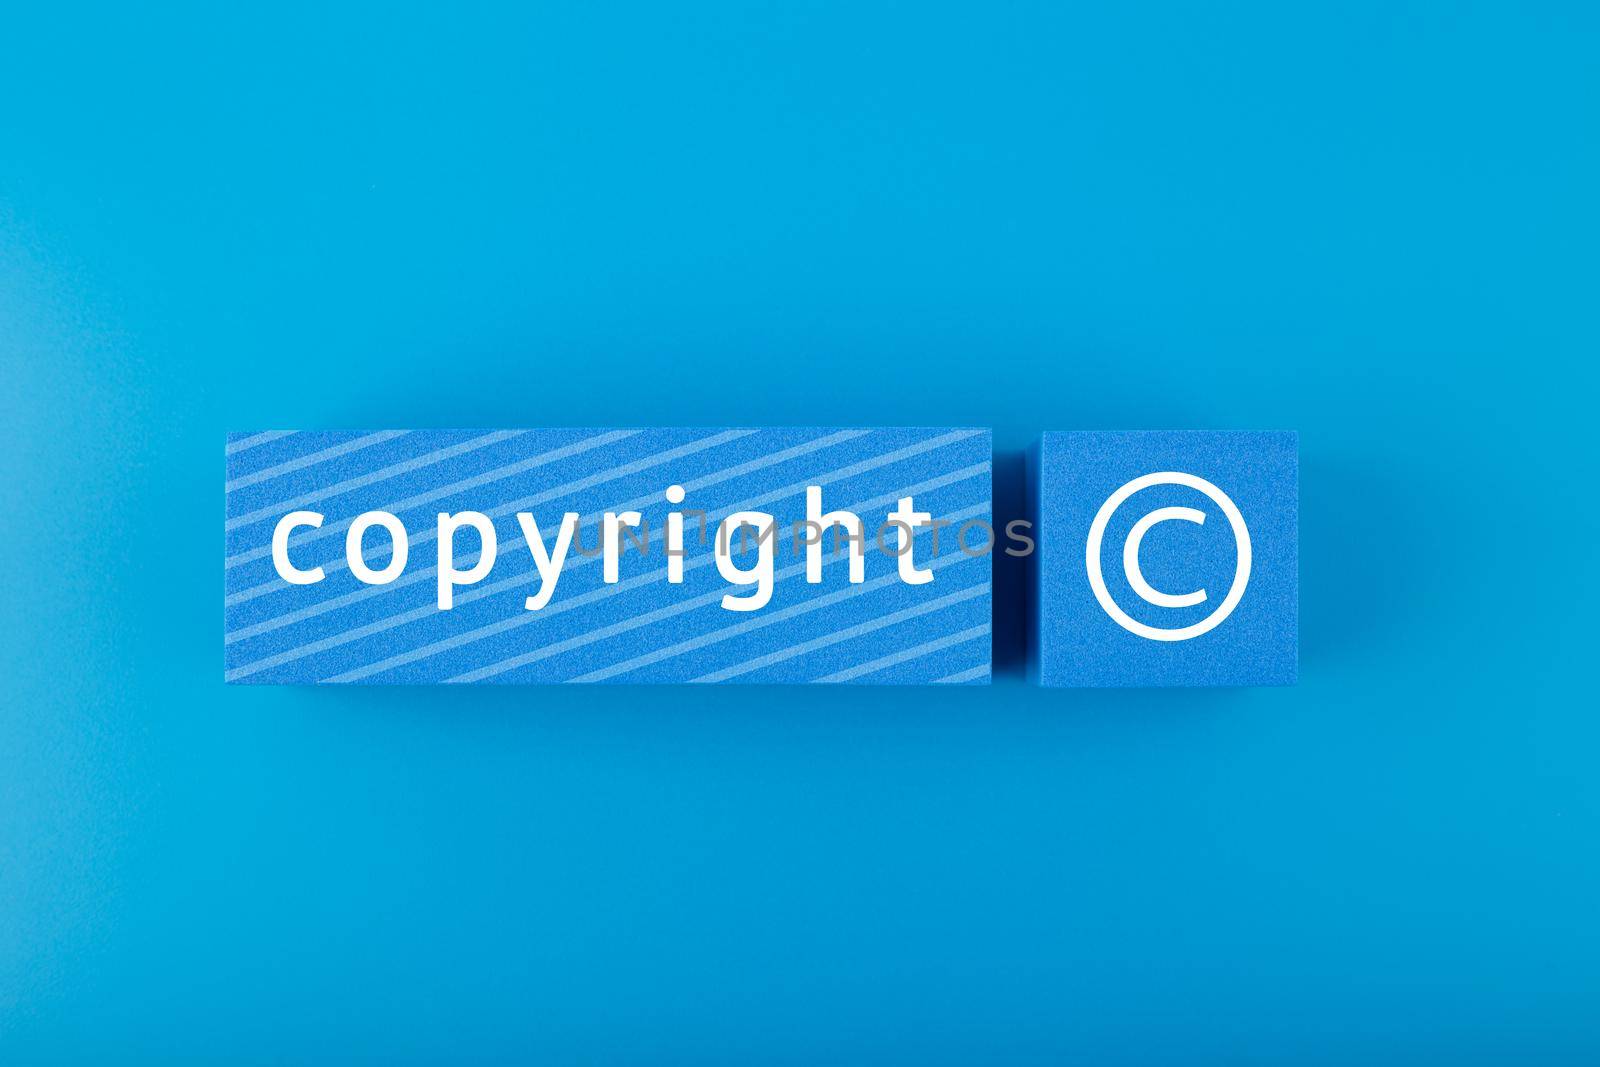 Minimal trendy copyright and patenting concept. Copyright word and symbol on blue blocks against blue background